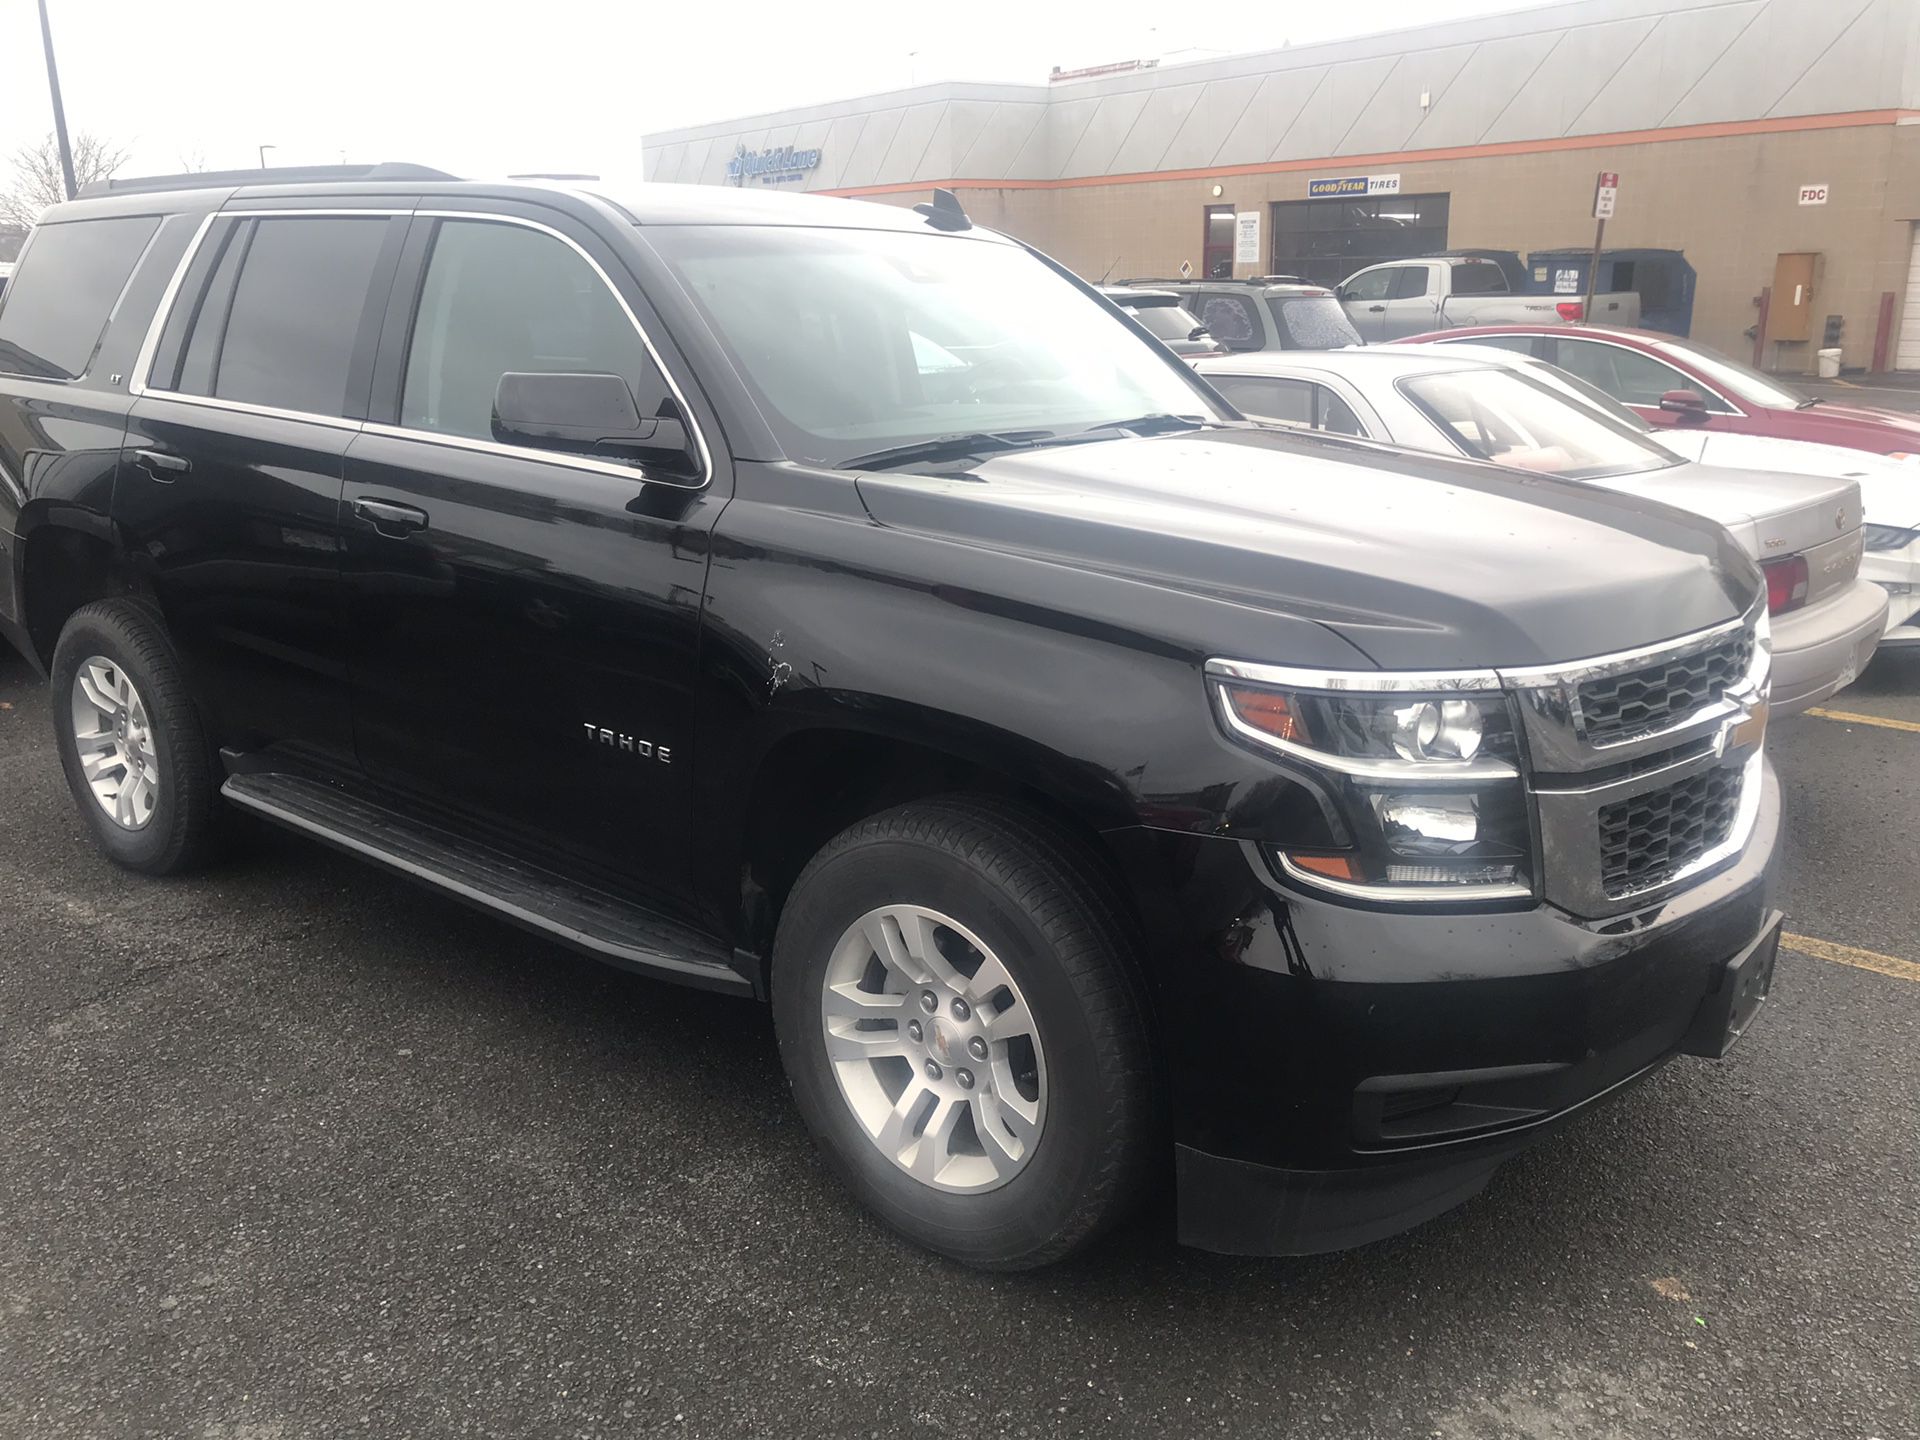 2019 Chevrolet Tahoe LT /2nd Row Captain’s Chairs/ 4WD with 14,878 miles for $47,797!